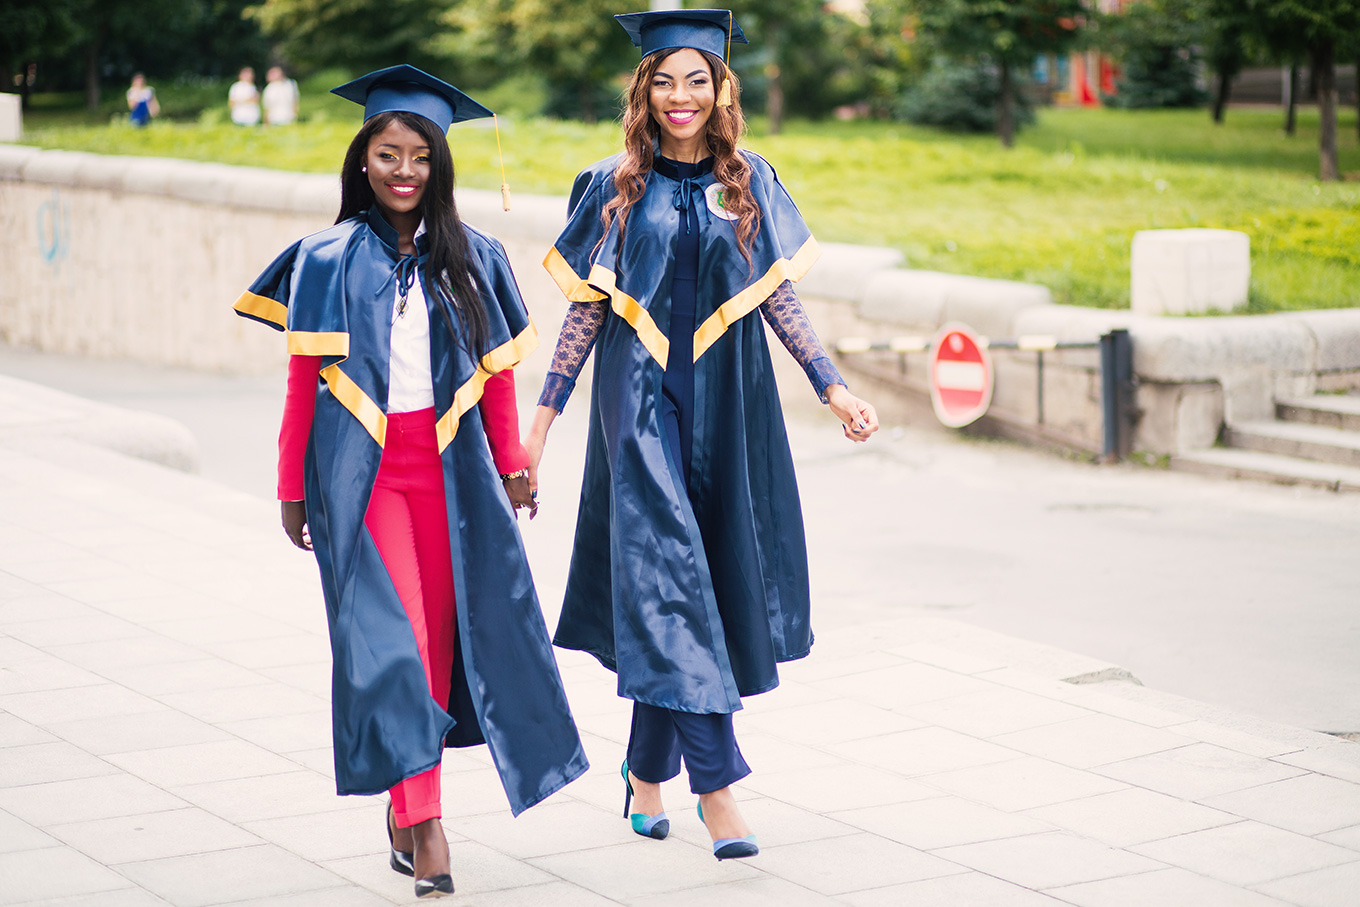 Fashion blogger Modavracha graduated to become a medical doctor